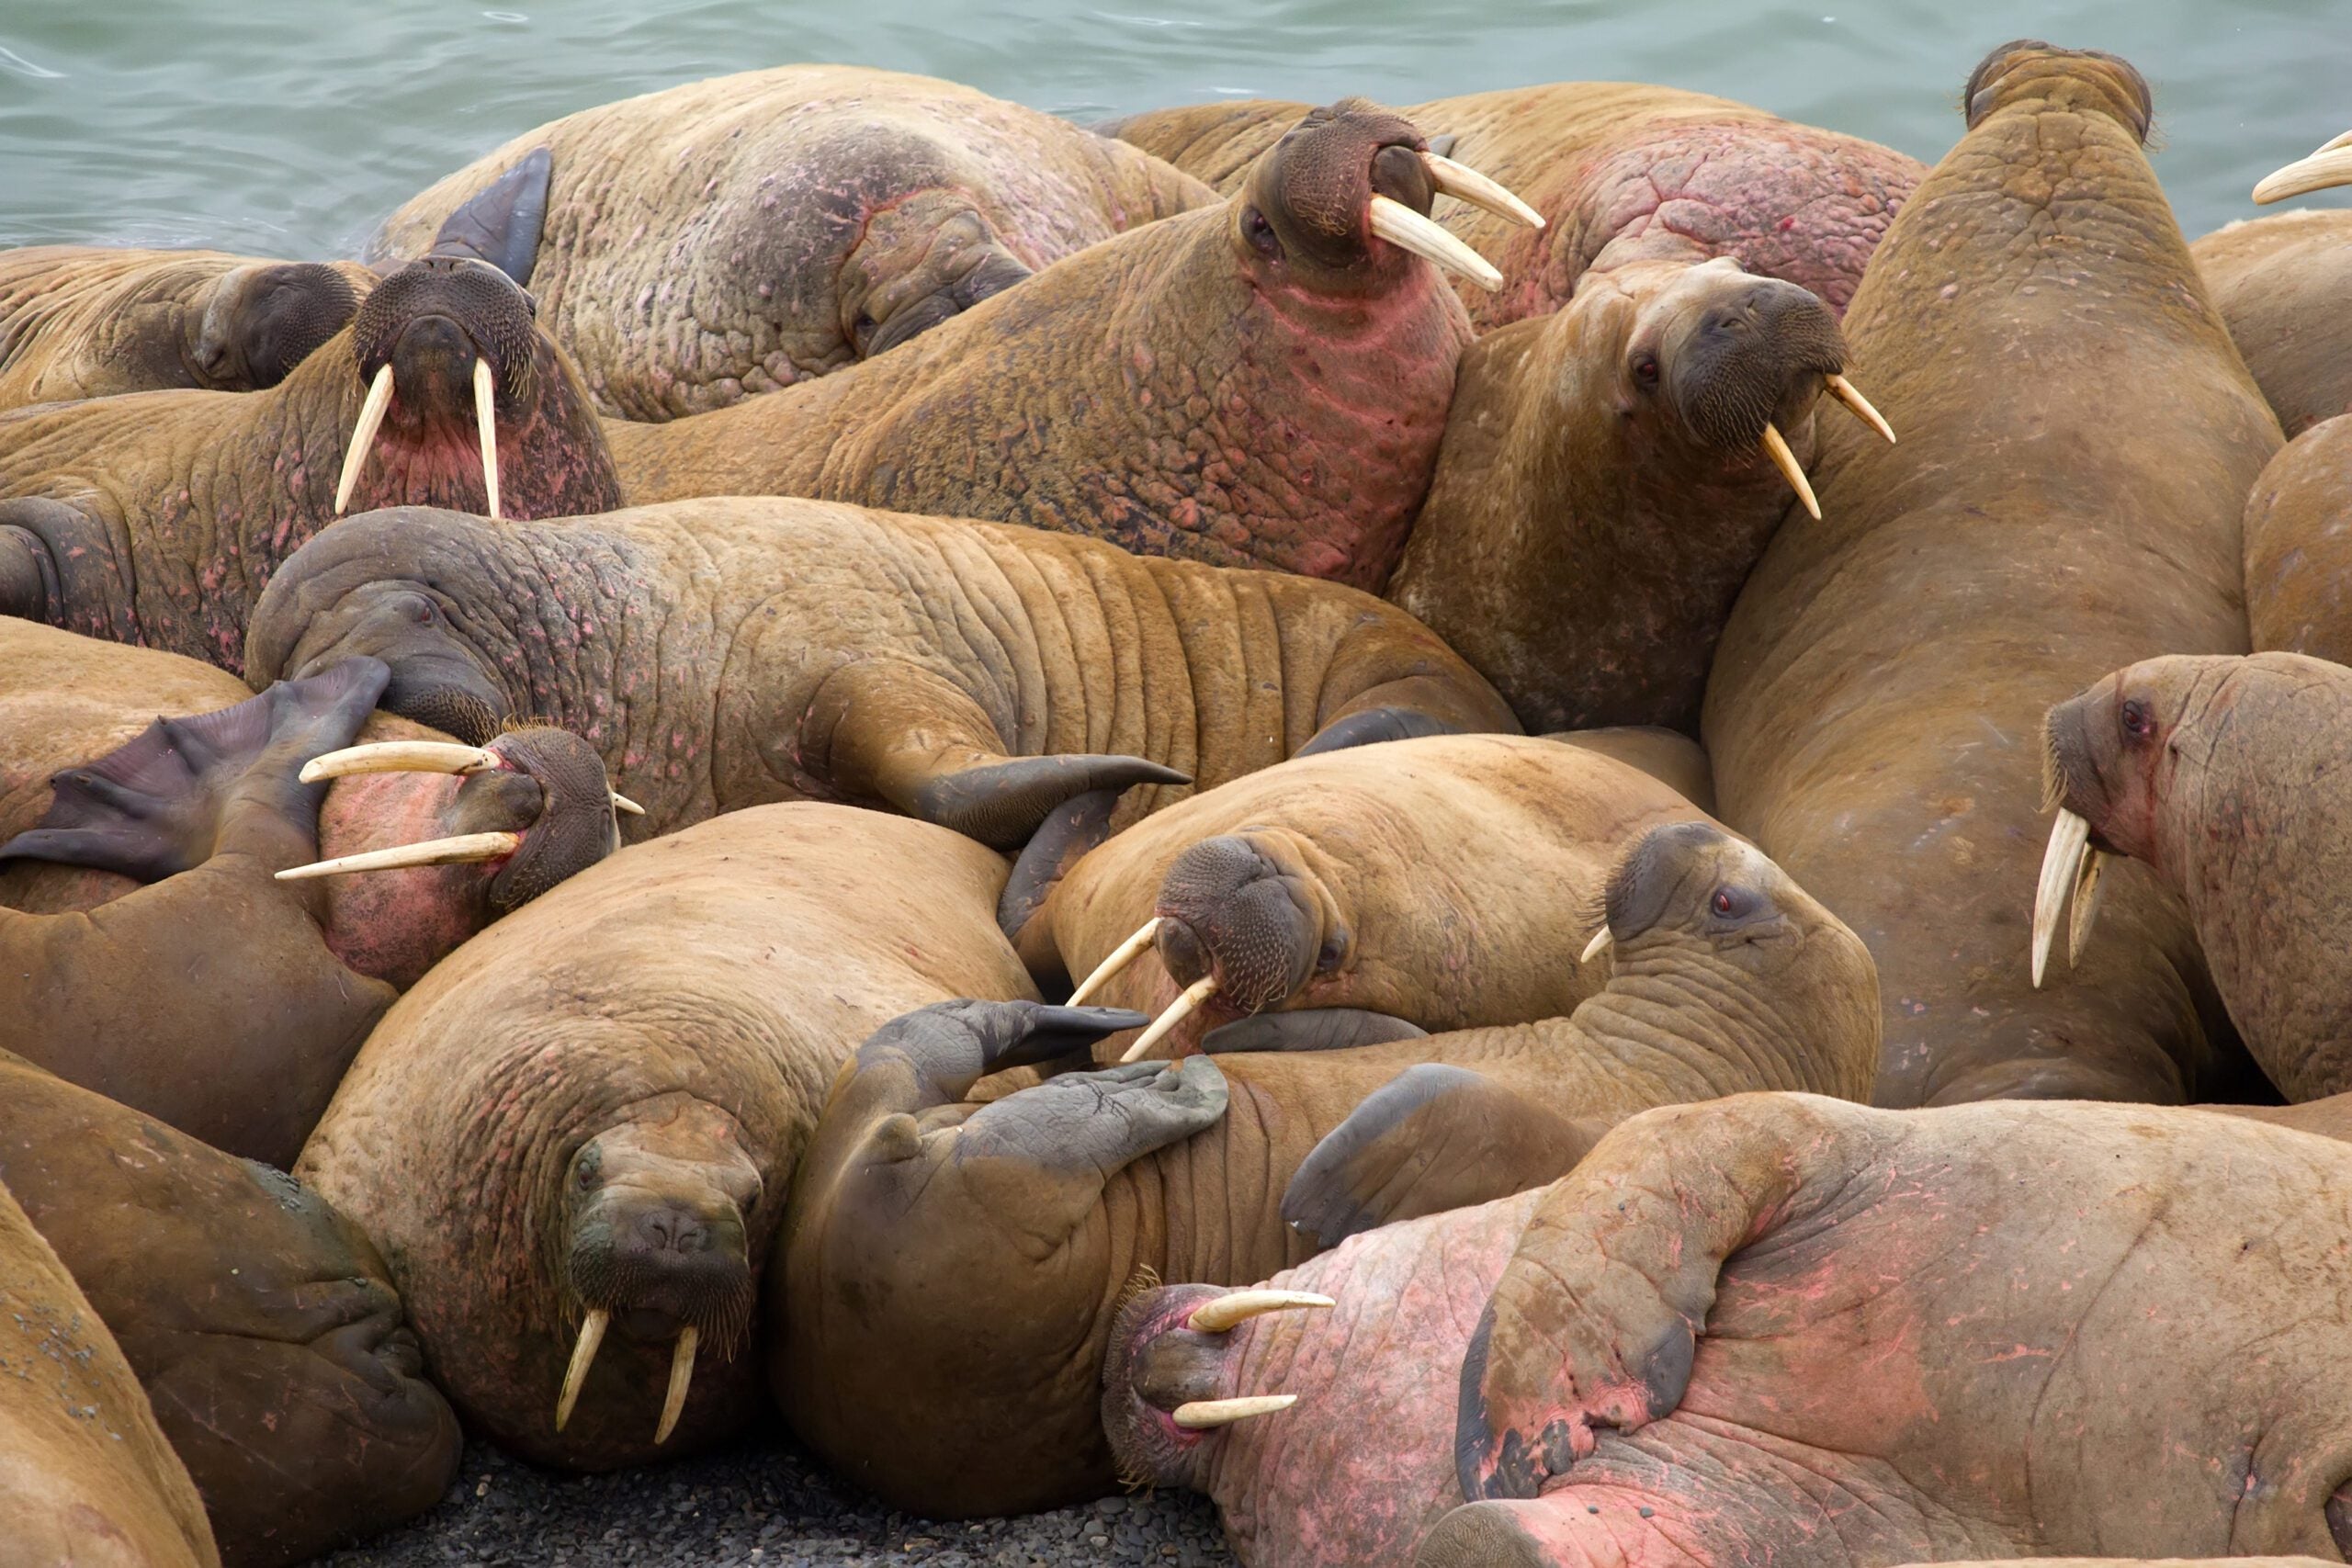 This pile of walruses is feeling satisfied after a day of dining on sustainable marine invertebrates.